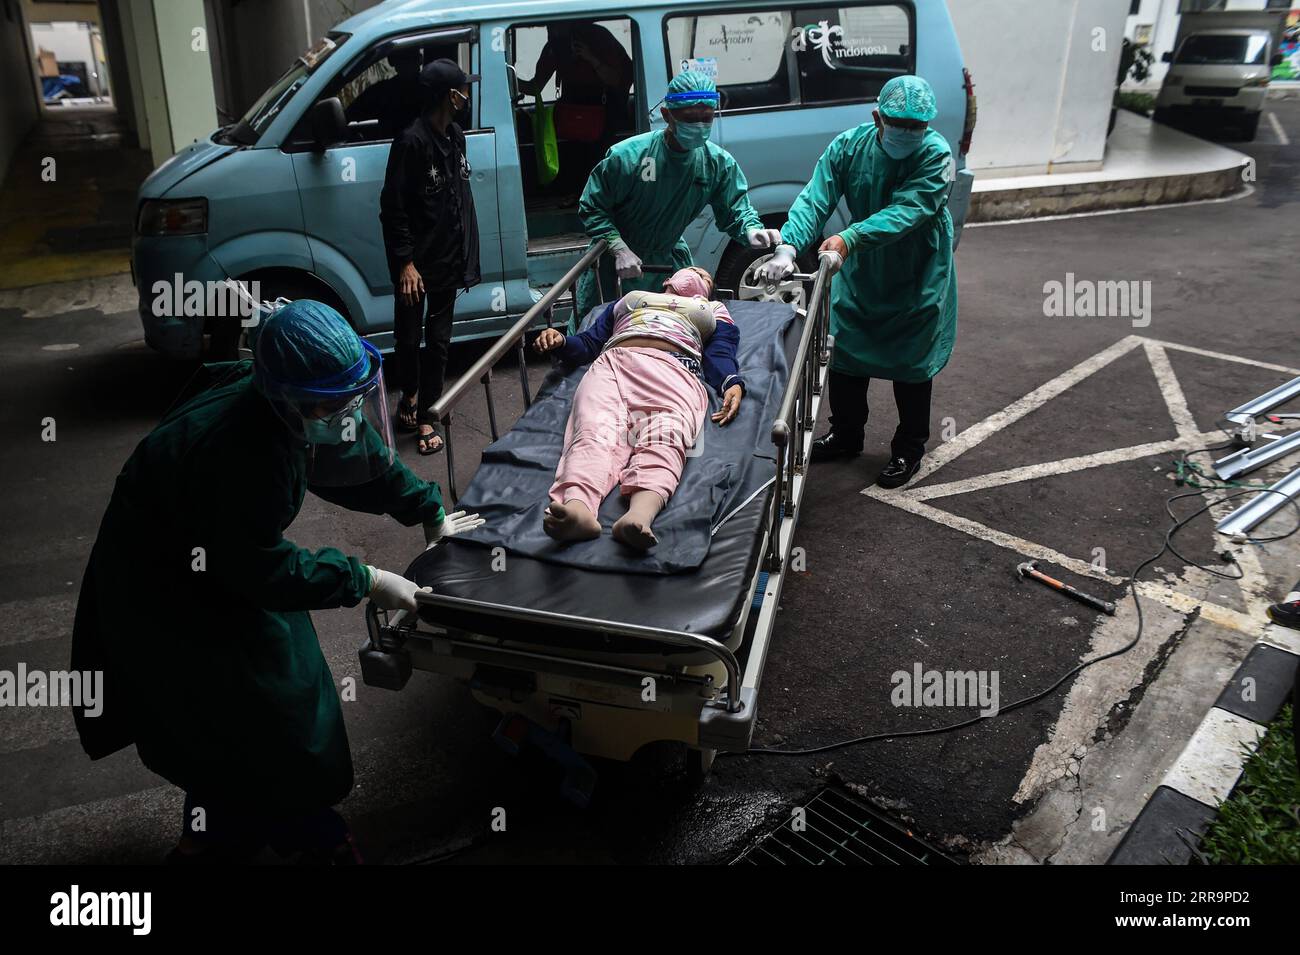 210627 -- JAKARTA, June 27, 2021 -- Health workers transfer a patient with high fever in Jakarta, Indonesia, on June 24, 2021. The Health Ministry said on June 26, 2021 that the country recorded 21,095 new COVID-19 cases in the past 24 hours, the highest daily spike since March last year when the first COVID-19 case was detected in the country, bringing the total national tally to 2,093,962.  INDONESIA-JAKARTA-COVID-19 PATIENT AgungxKuncahyaxB. PUBLICATIONxNOTxINxCHN Stock Photo